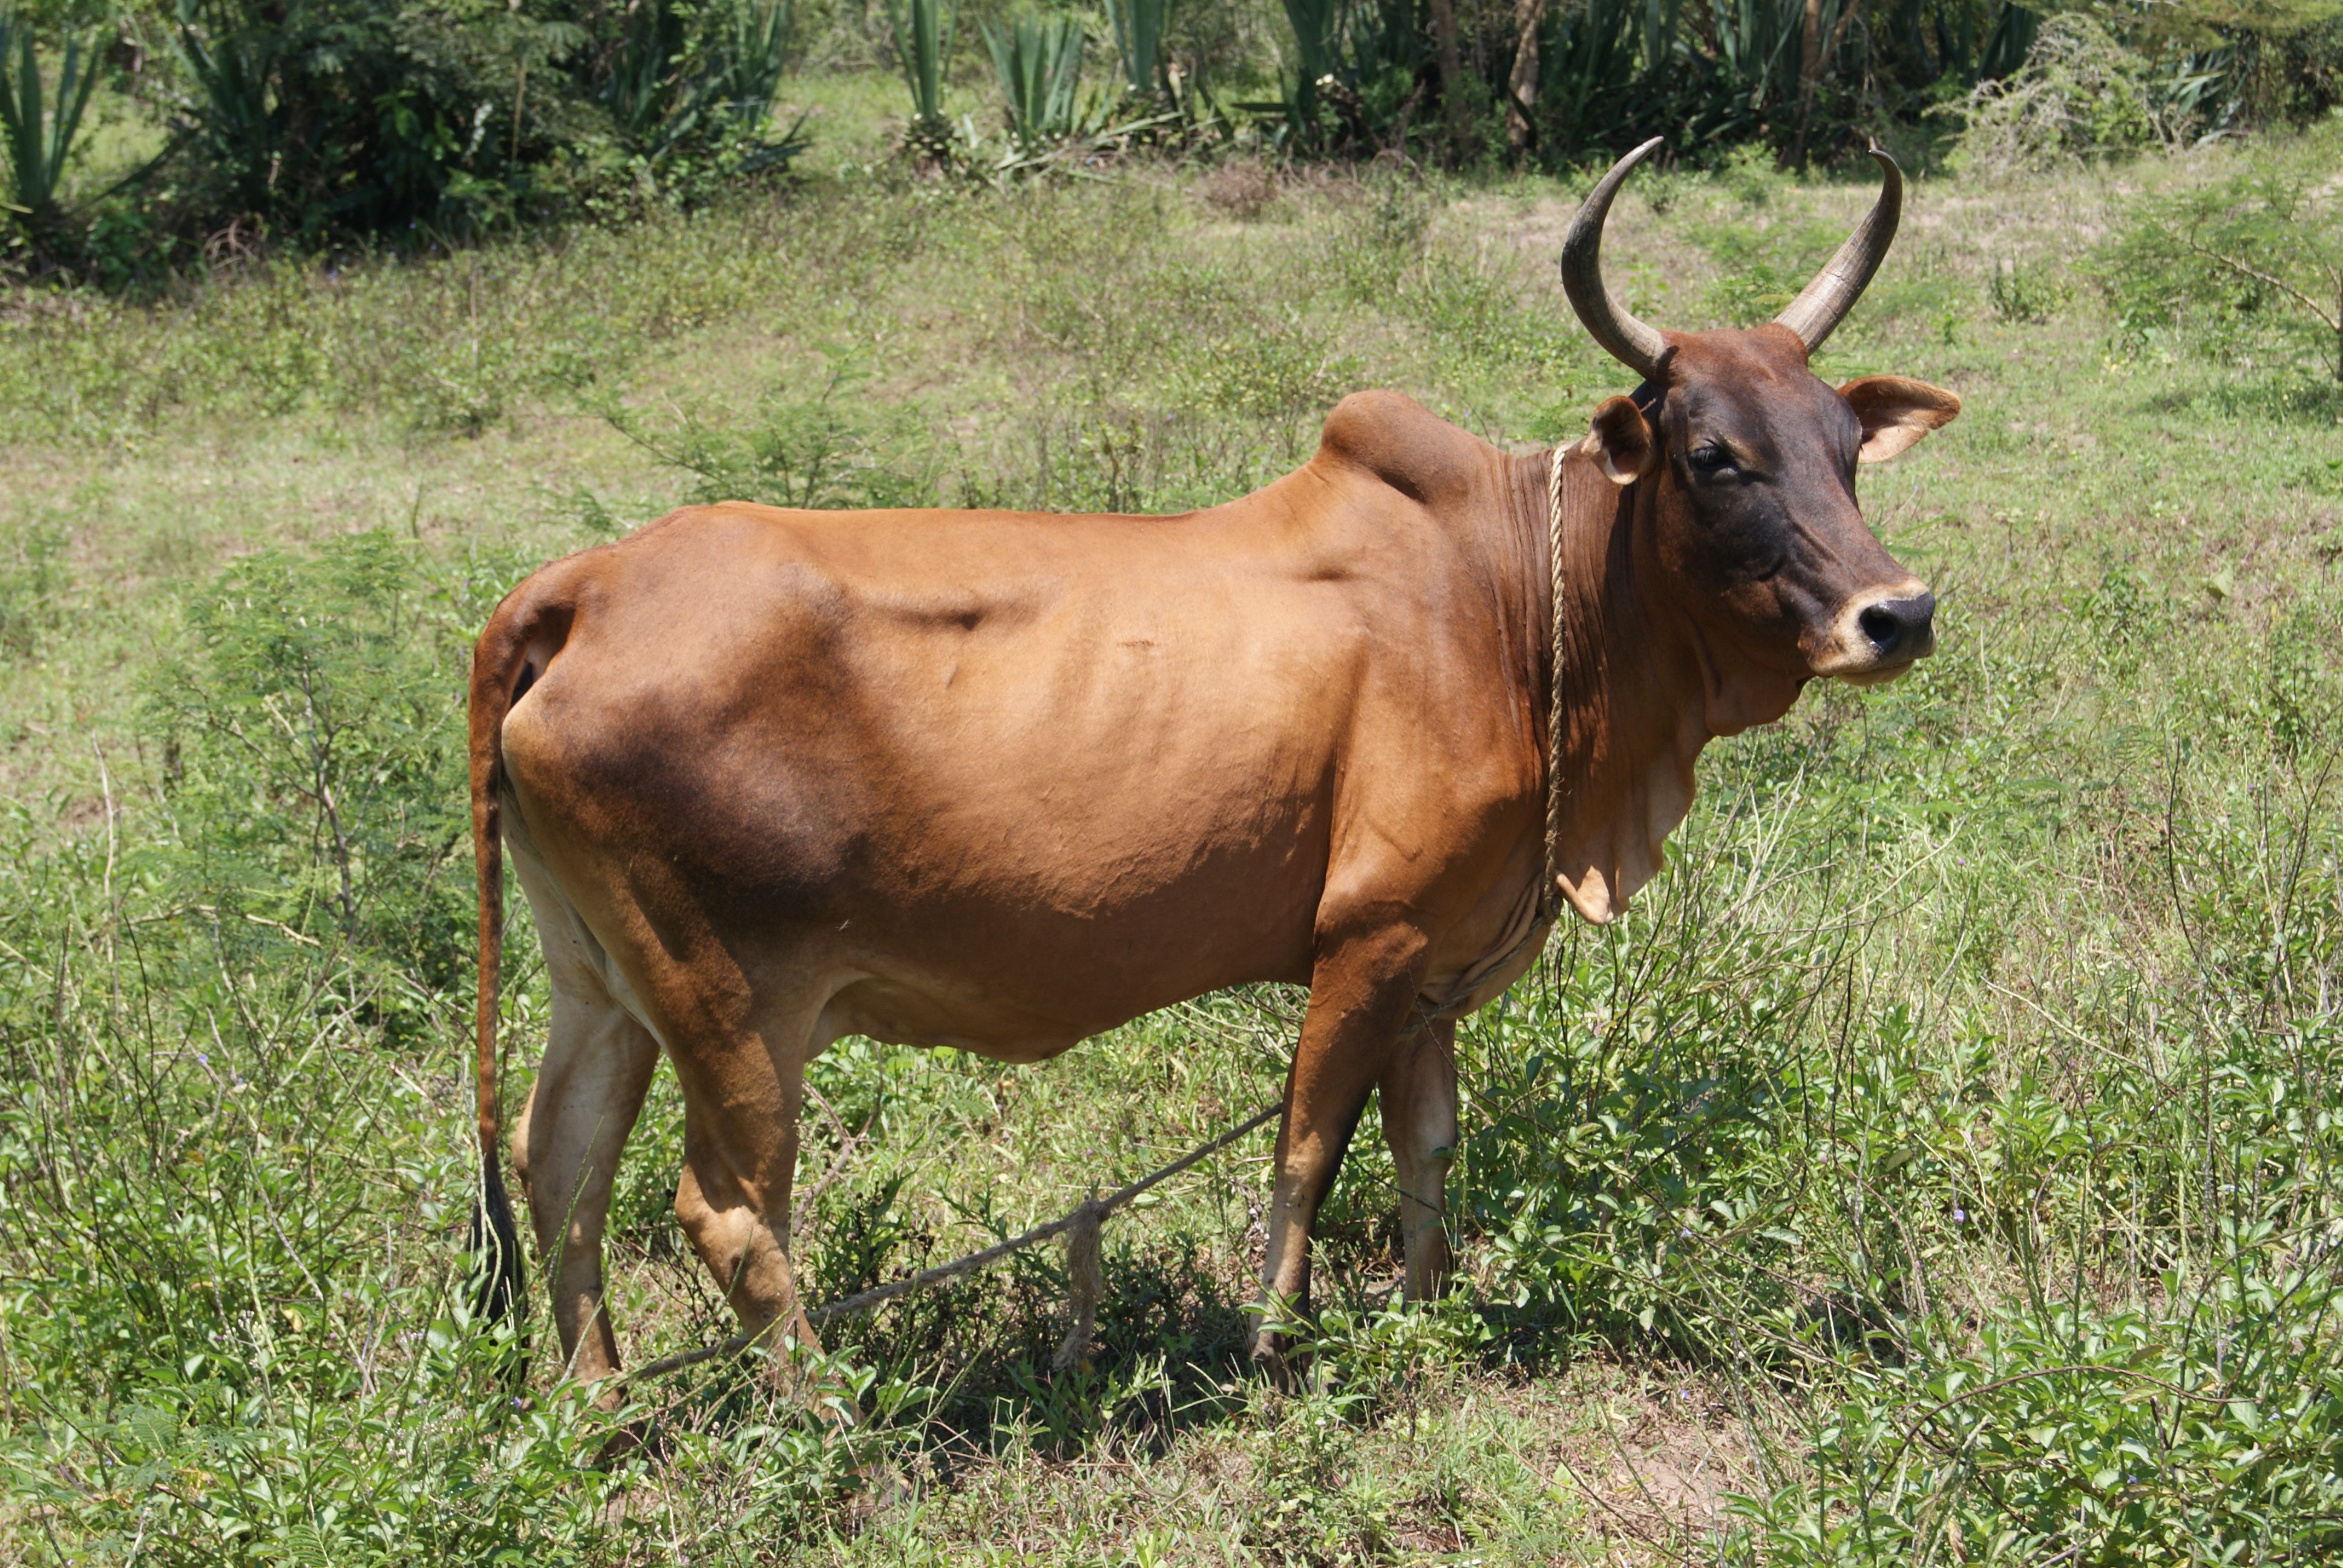 A brown sebu cow is standing and watching.